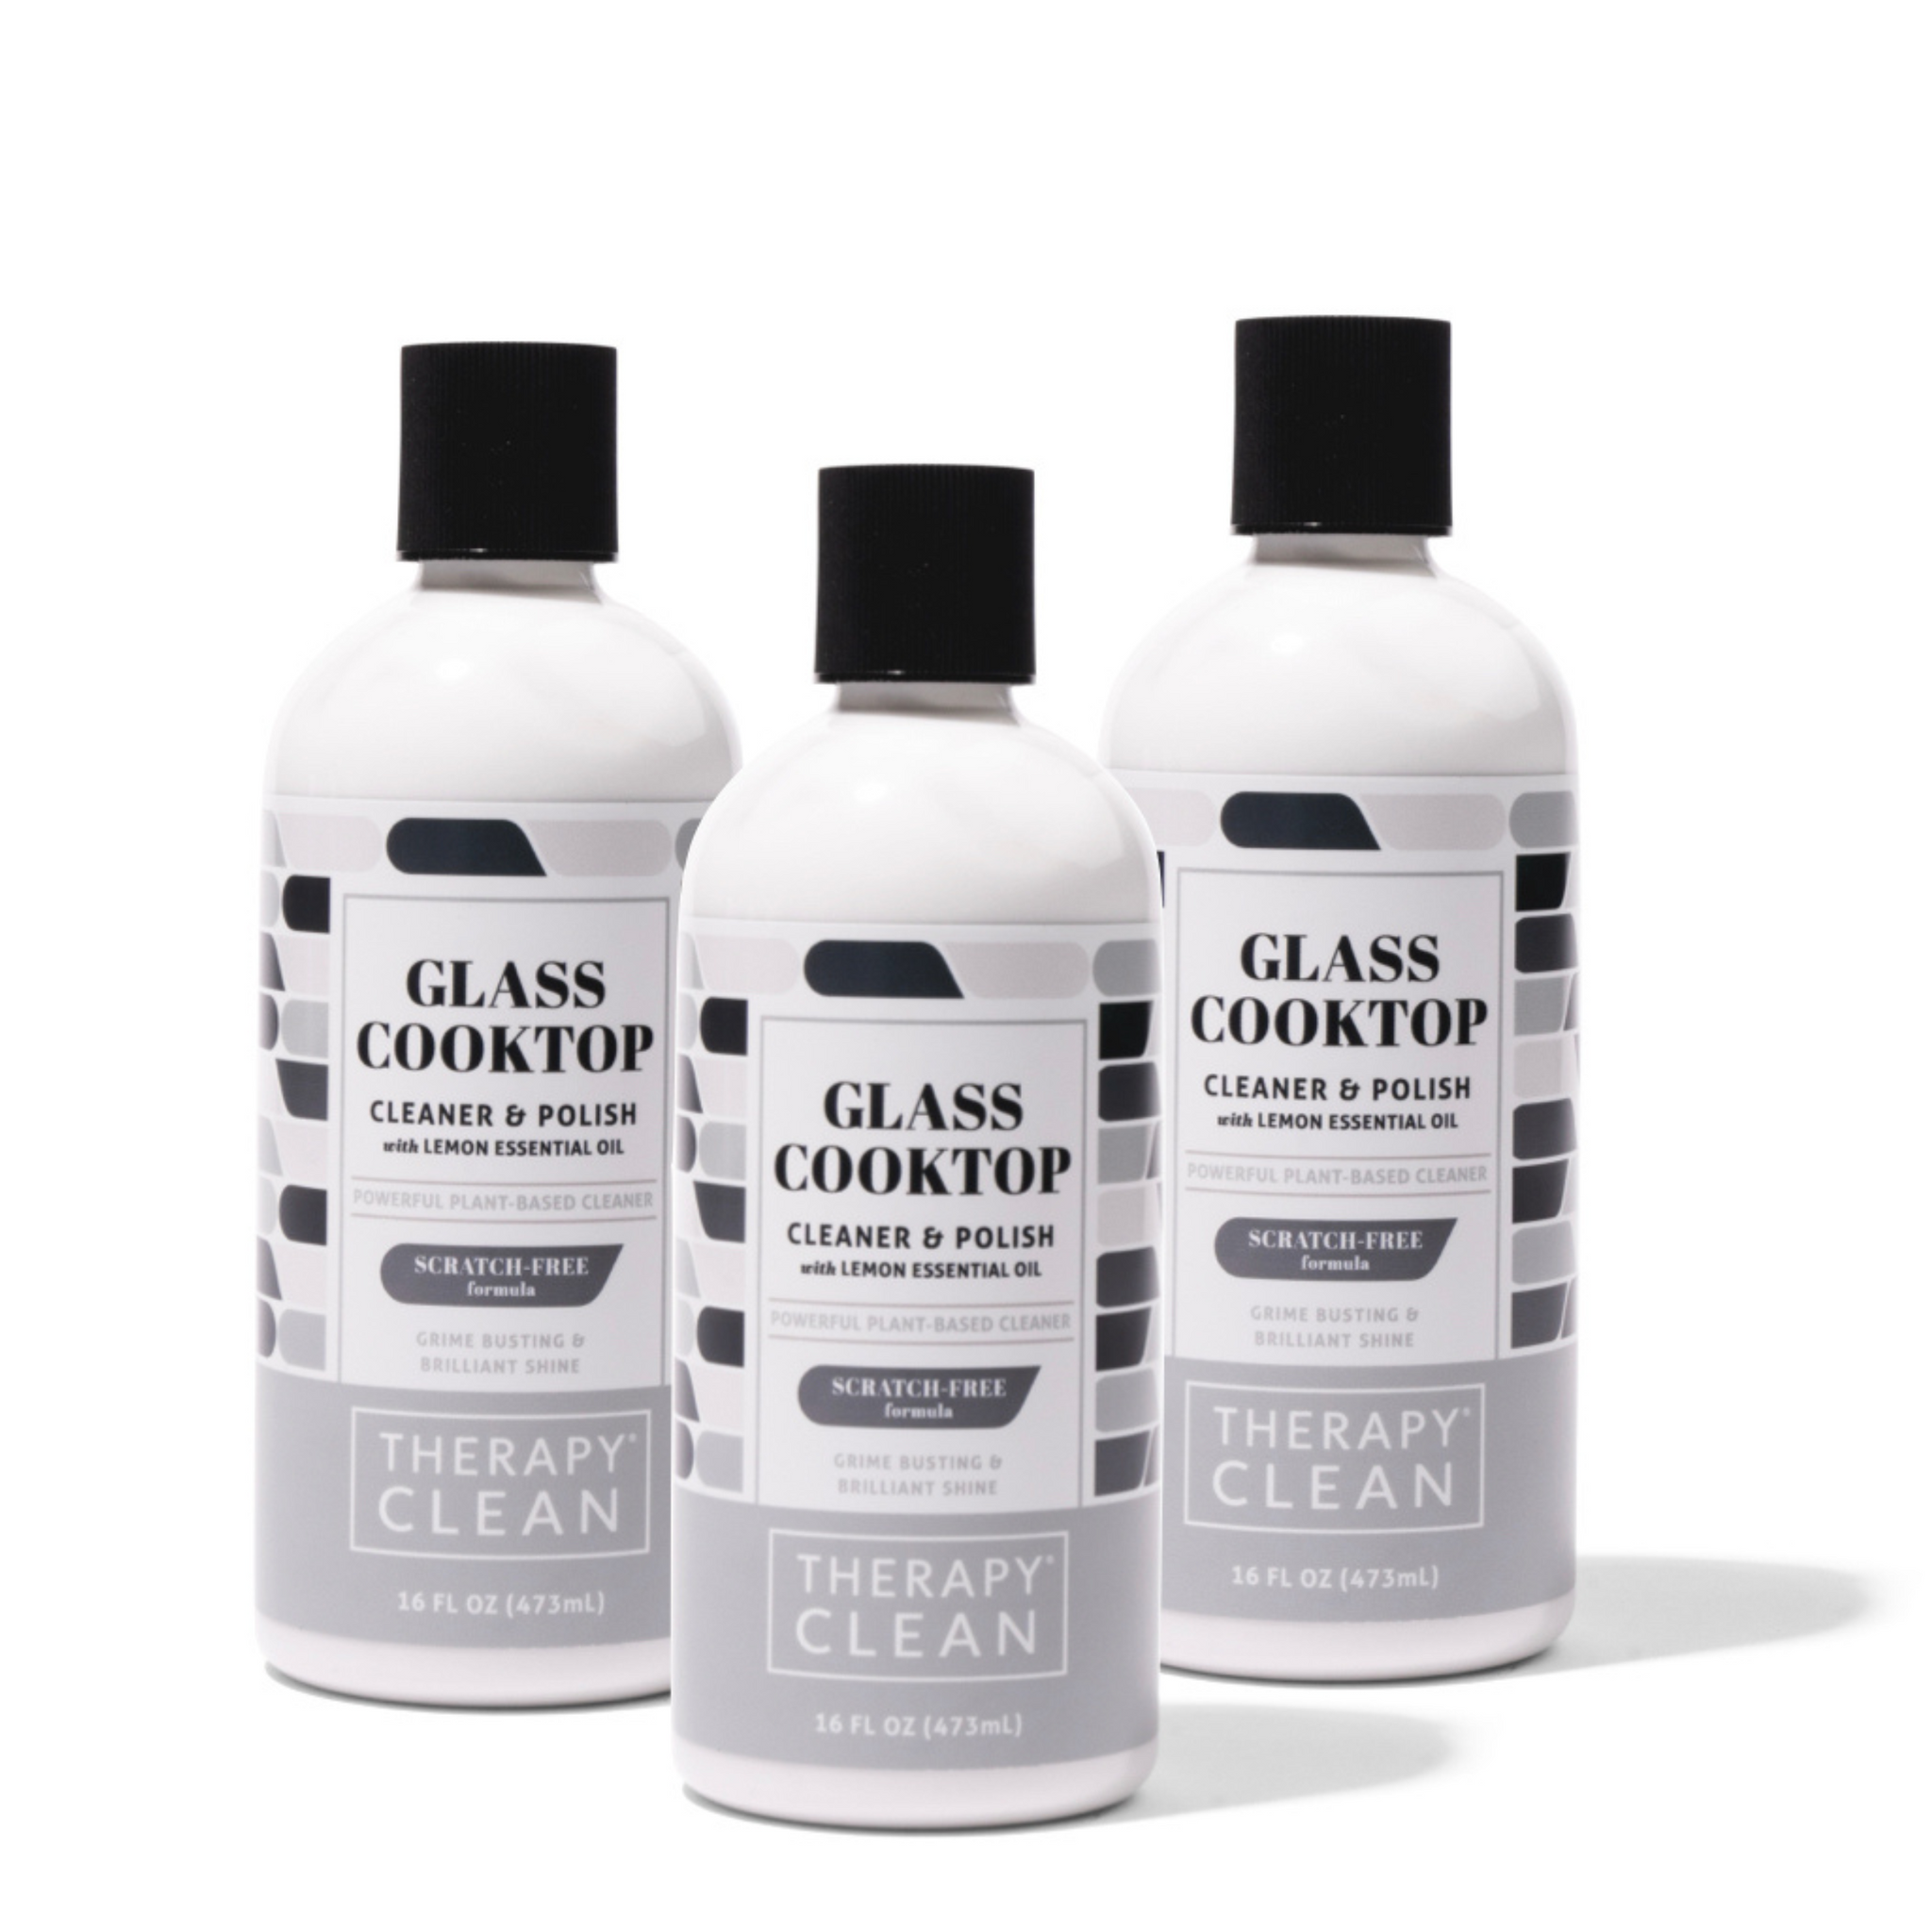 Glass Cooktop Cleaner and Polish 13,52 Fl Oz - Induction Cooktop